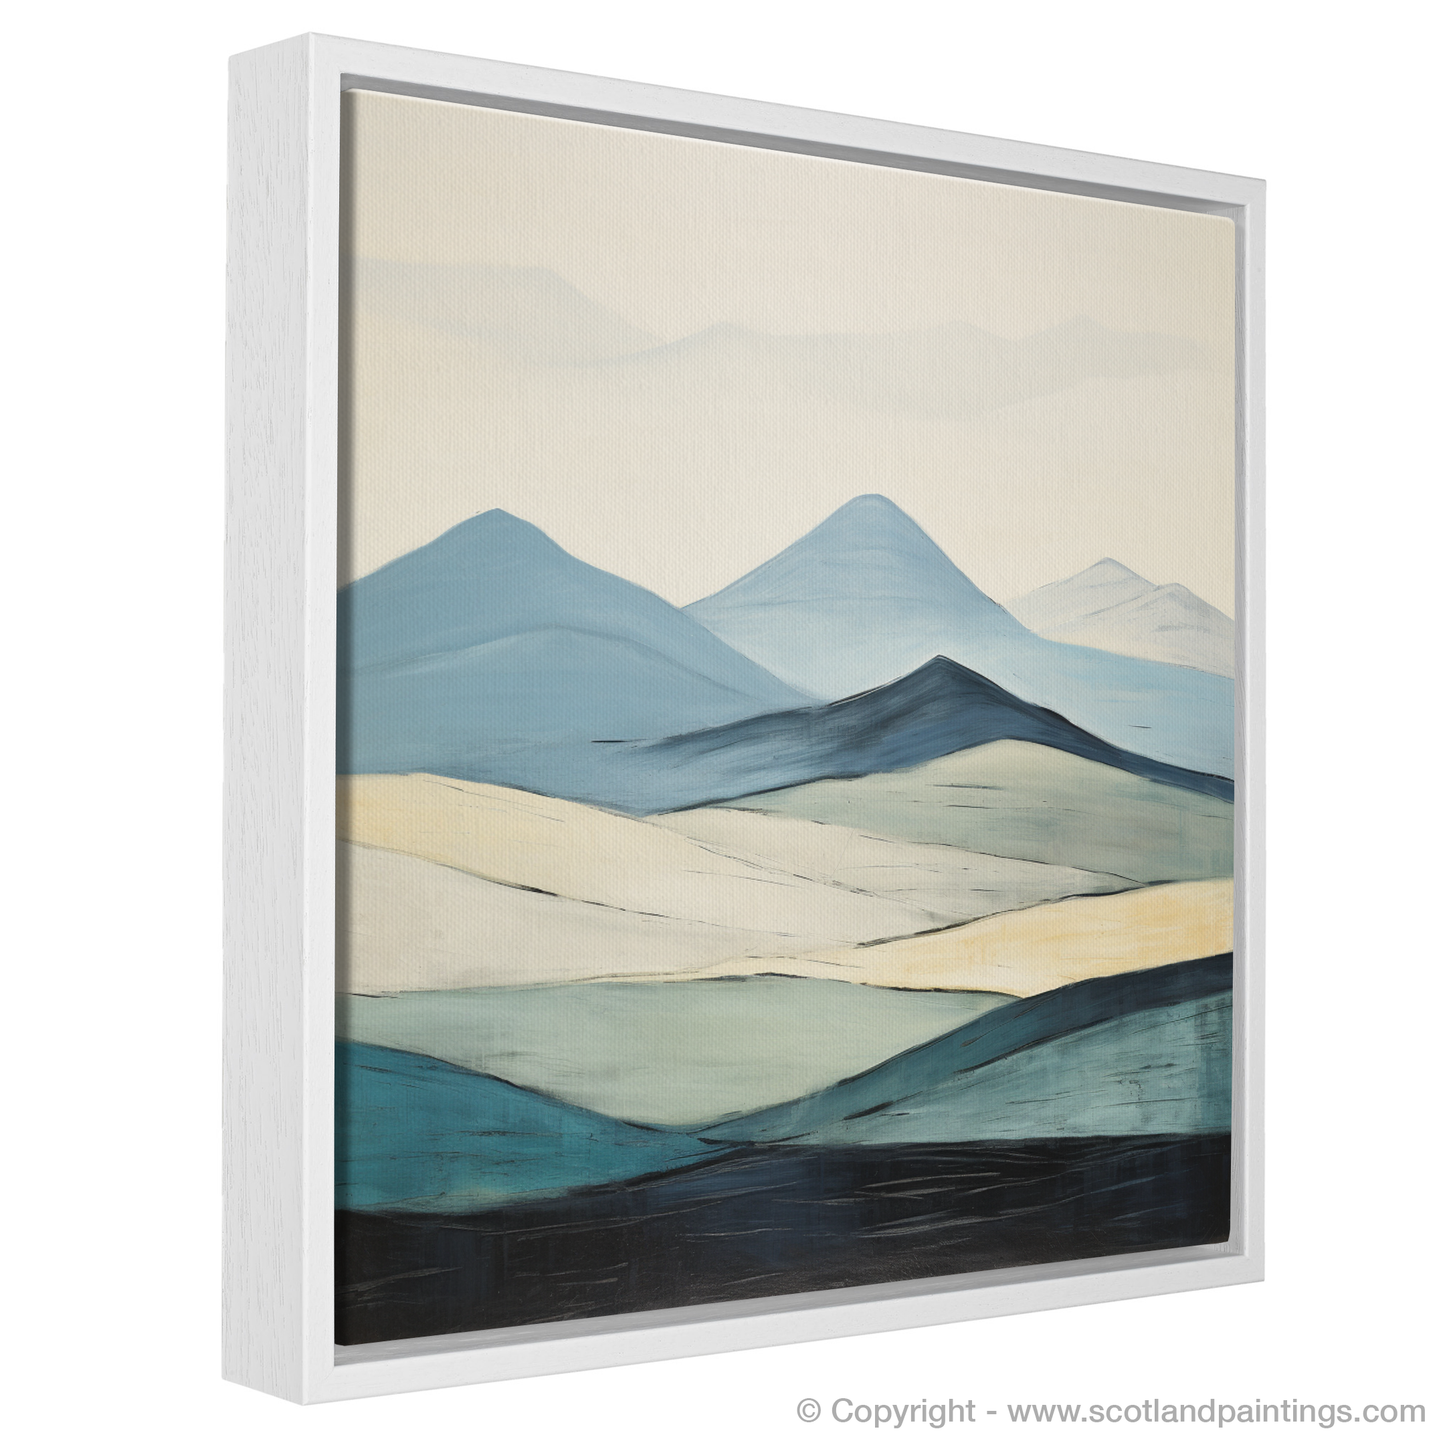 Painting and Art Print of Meall Corranaich entitled "Meall Corranaich in Abstract Tones: A Scottish Munro Reimagined".